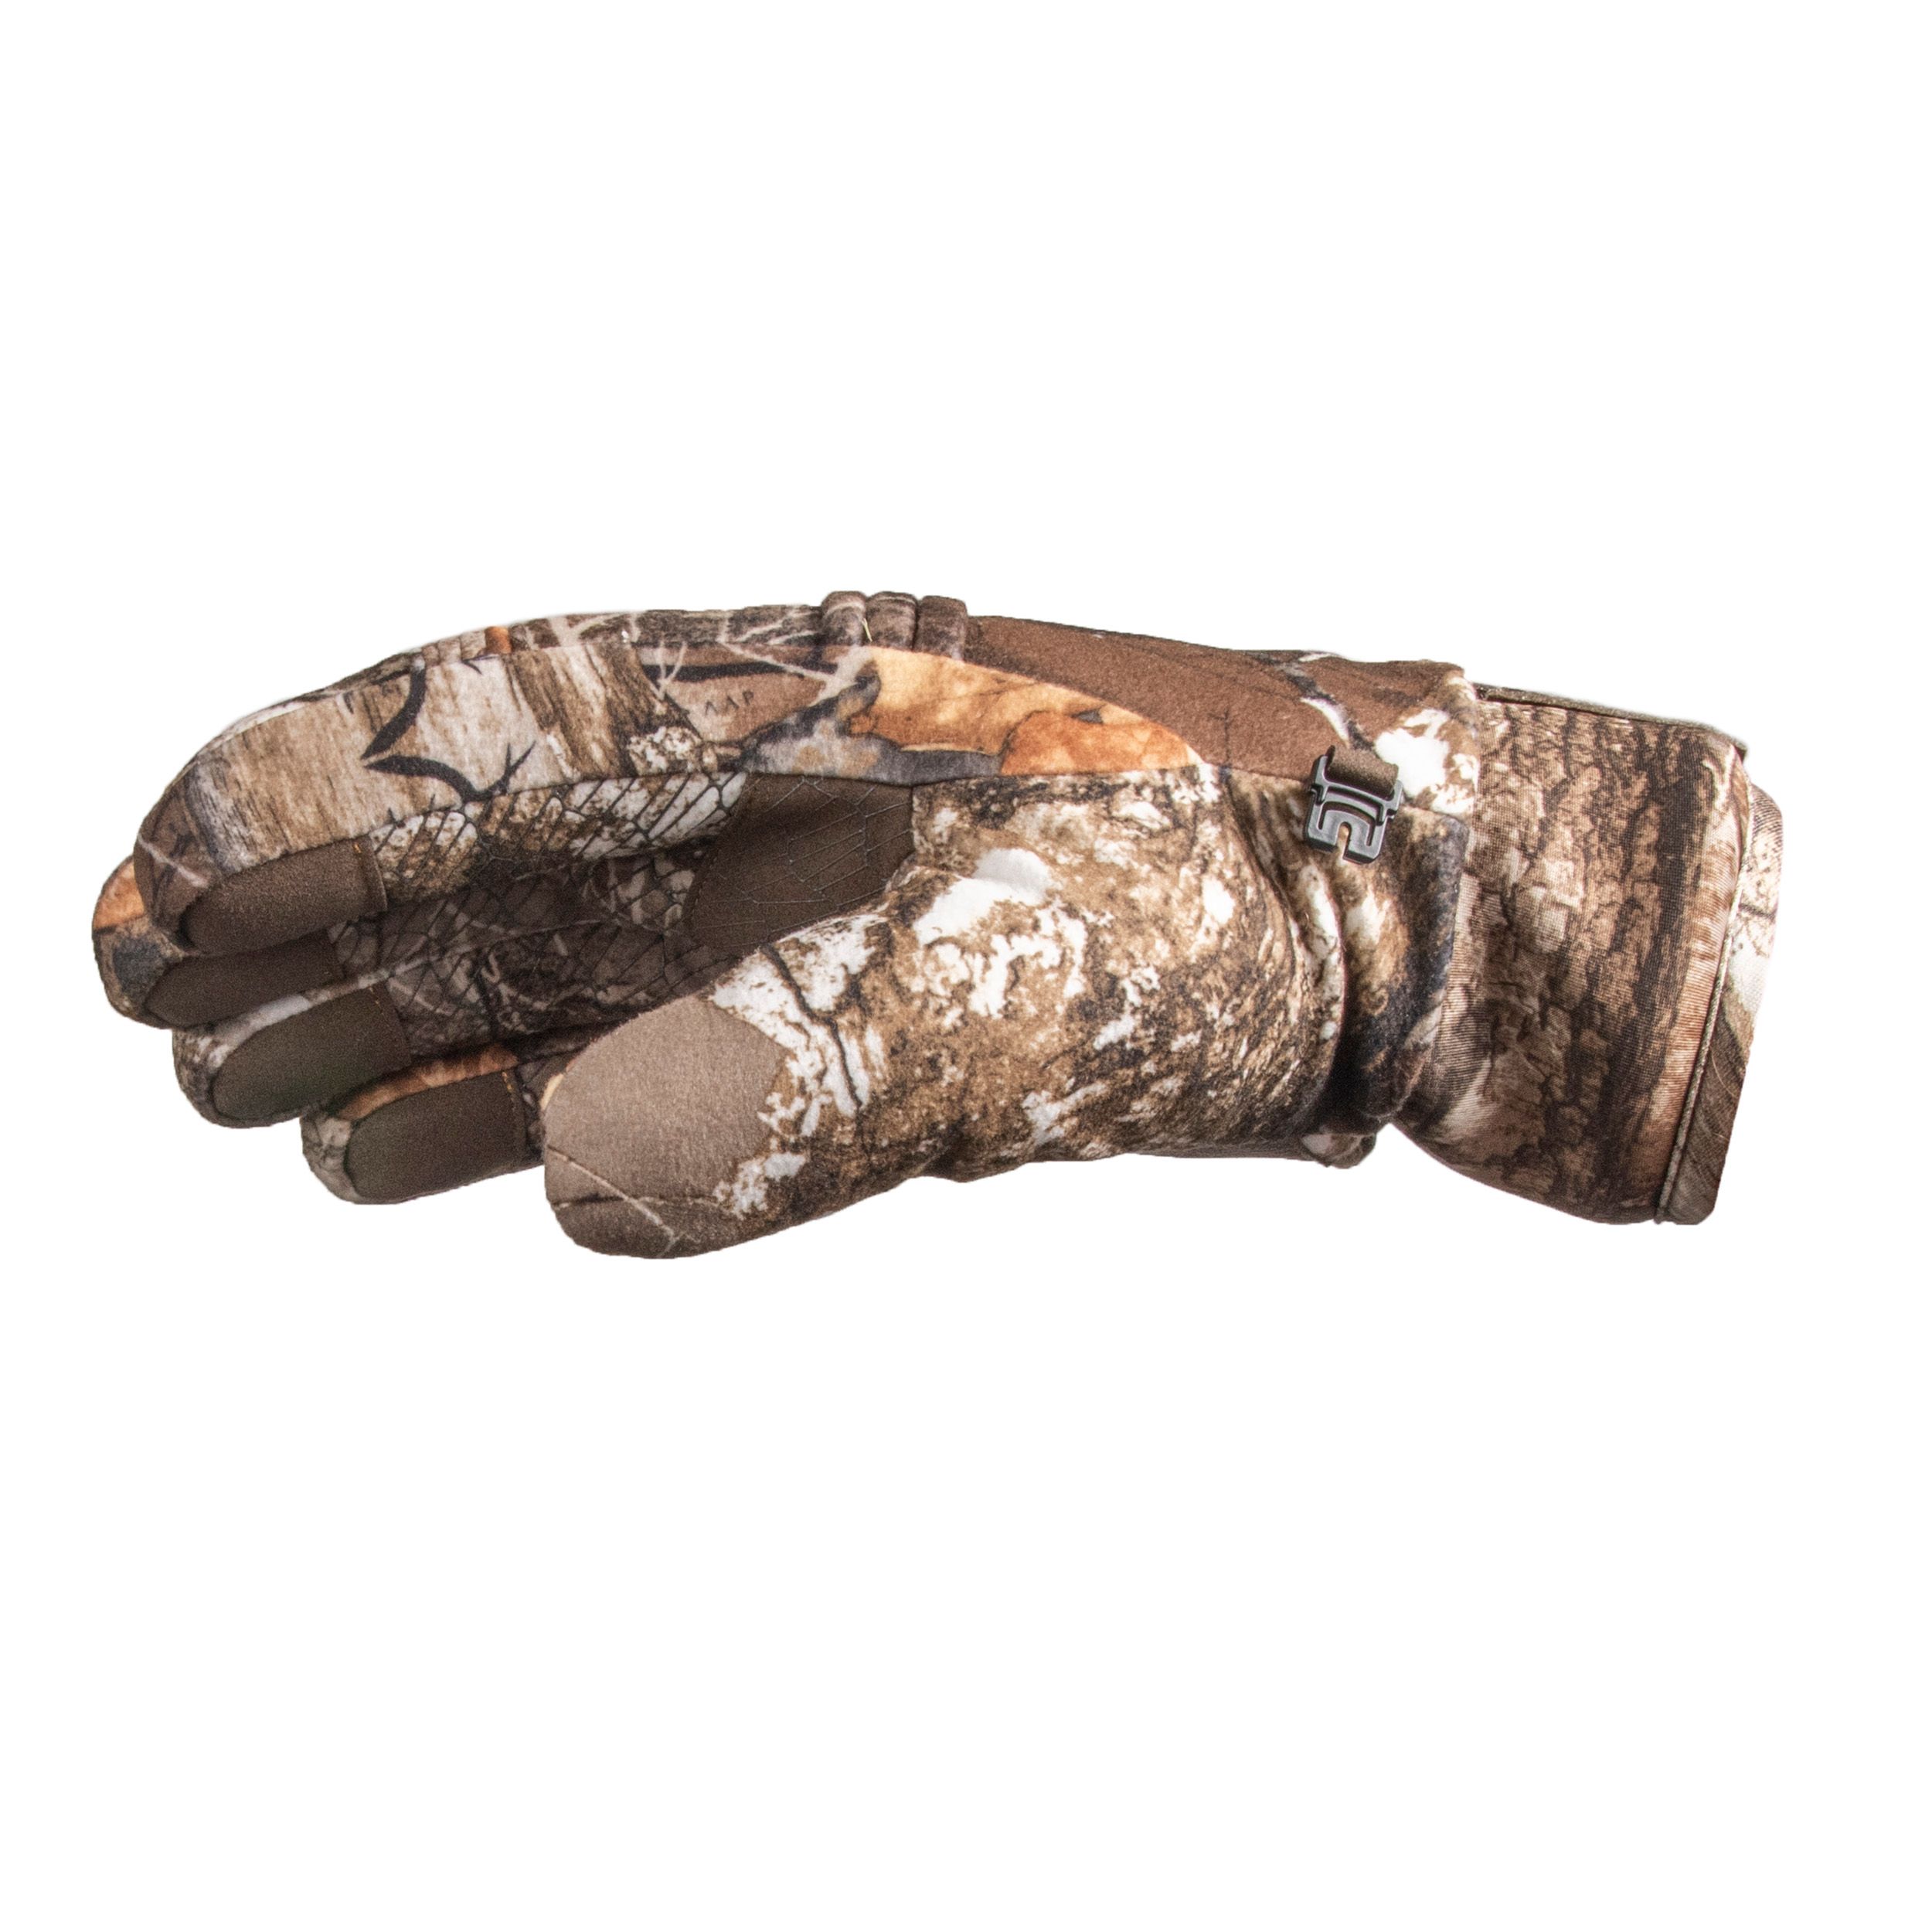 Realtree Edge Men's Heavyweight Gloves, Sizes M-L/XL - image 3 of 5